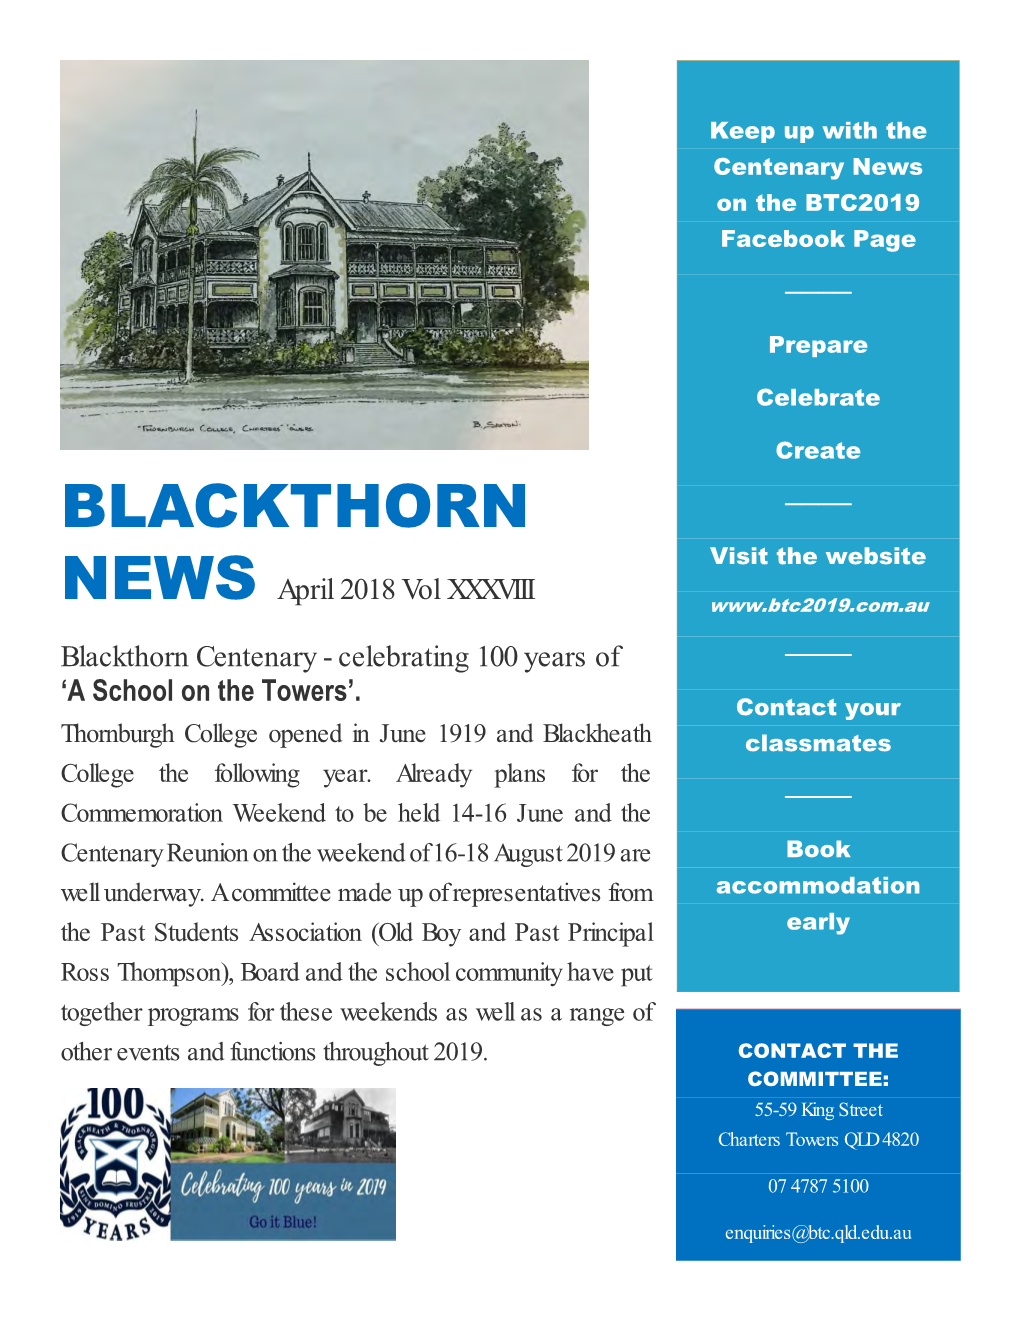 BLACKTHORN ──── Visit the Website April 2018 Vol XXXVIII NEWS Blackthorn Centenary - Celebrating 100 Years of ──── ‘A School on the Towers’